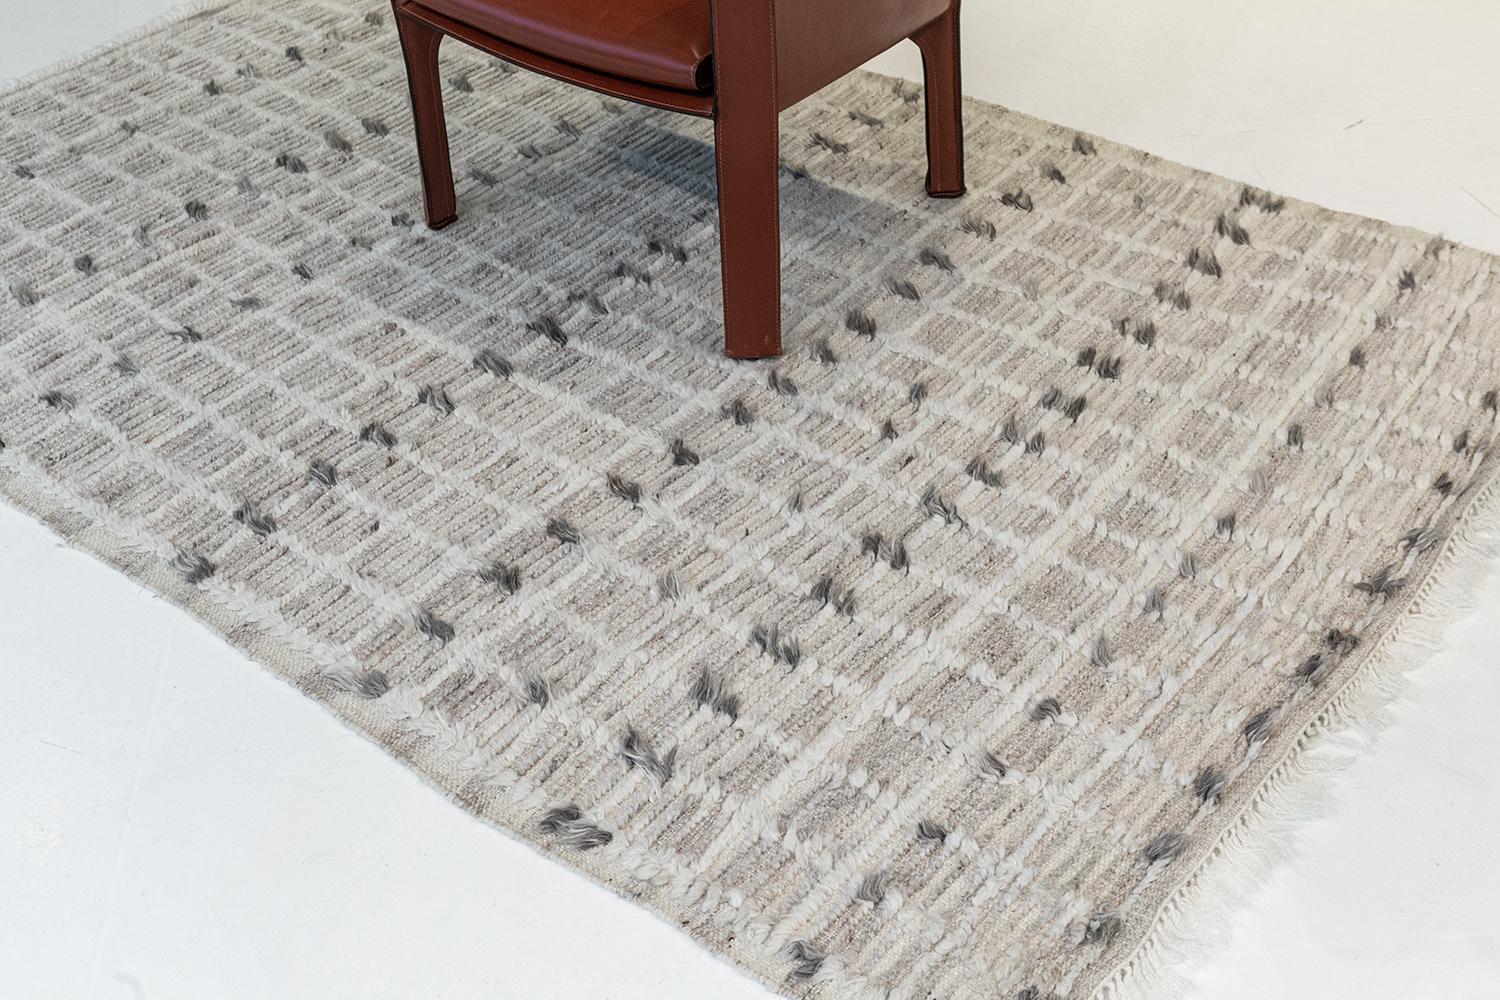 Amihan is a beautifully detailed pile weave from our Atlas Collection. The delicate checkered and ribbed style rug with ash gray tones give it a rich and charming feel. Repeating ash pile detailing also brings a bold and noteworthy uniqueness to